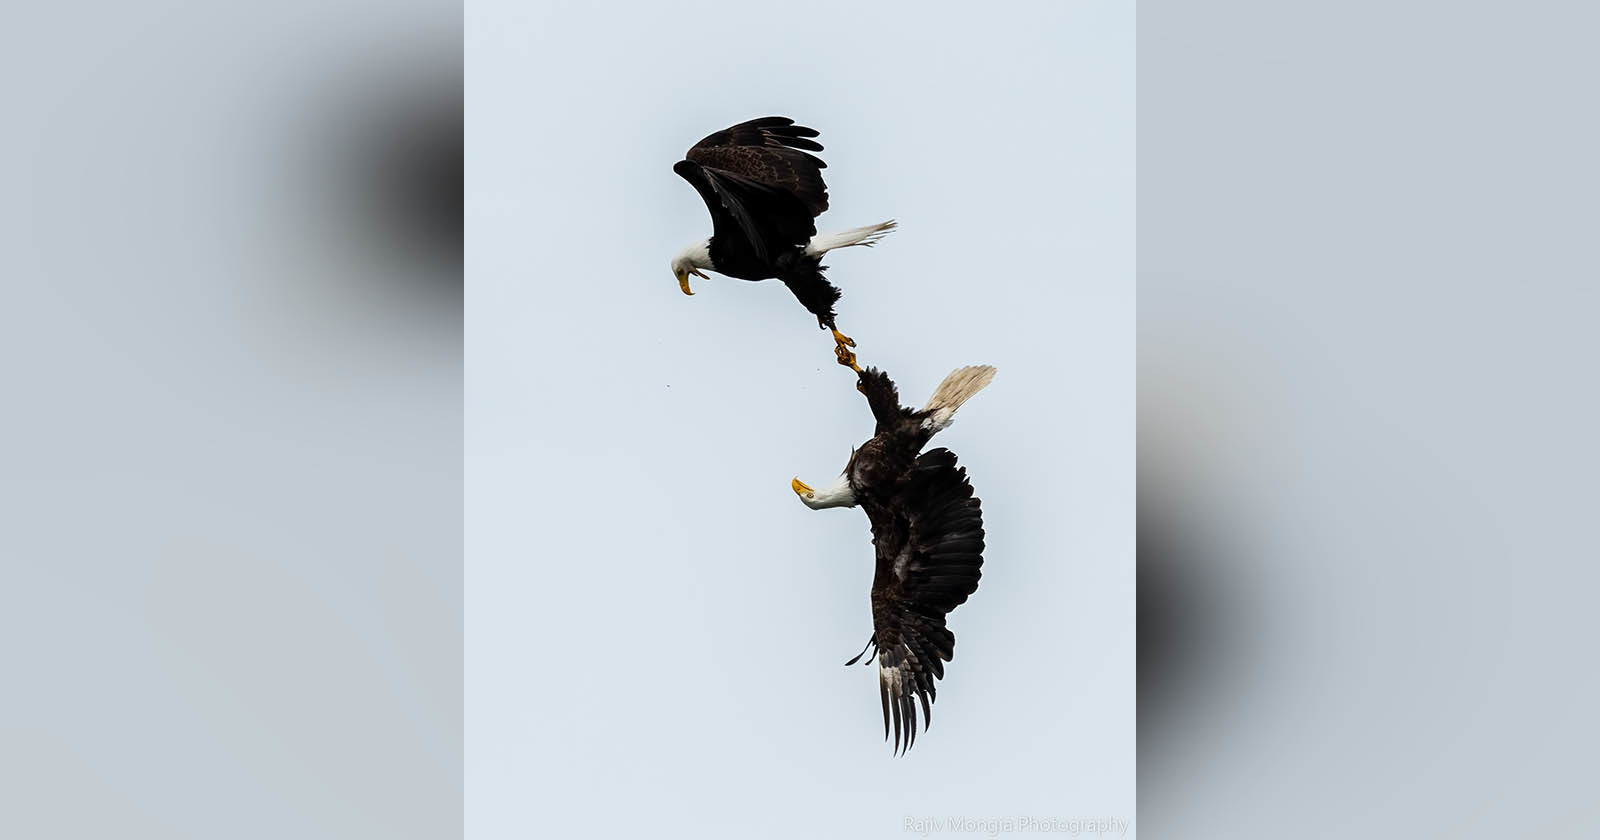  photographer catches bald eagles locking talons sky 